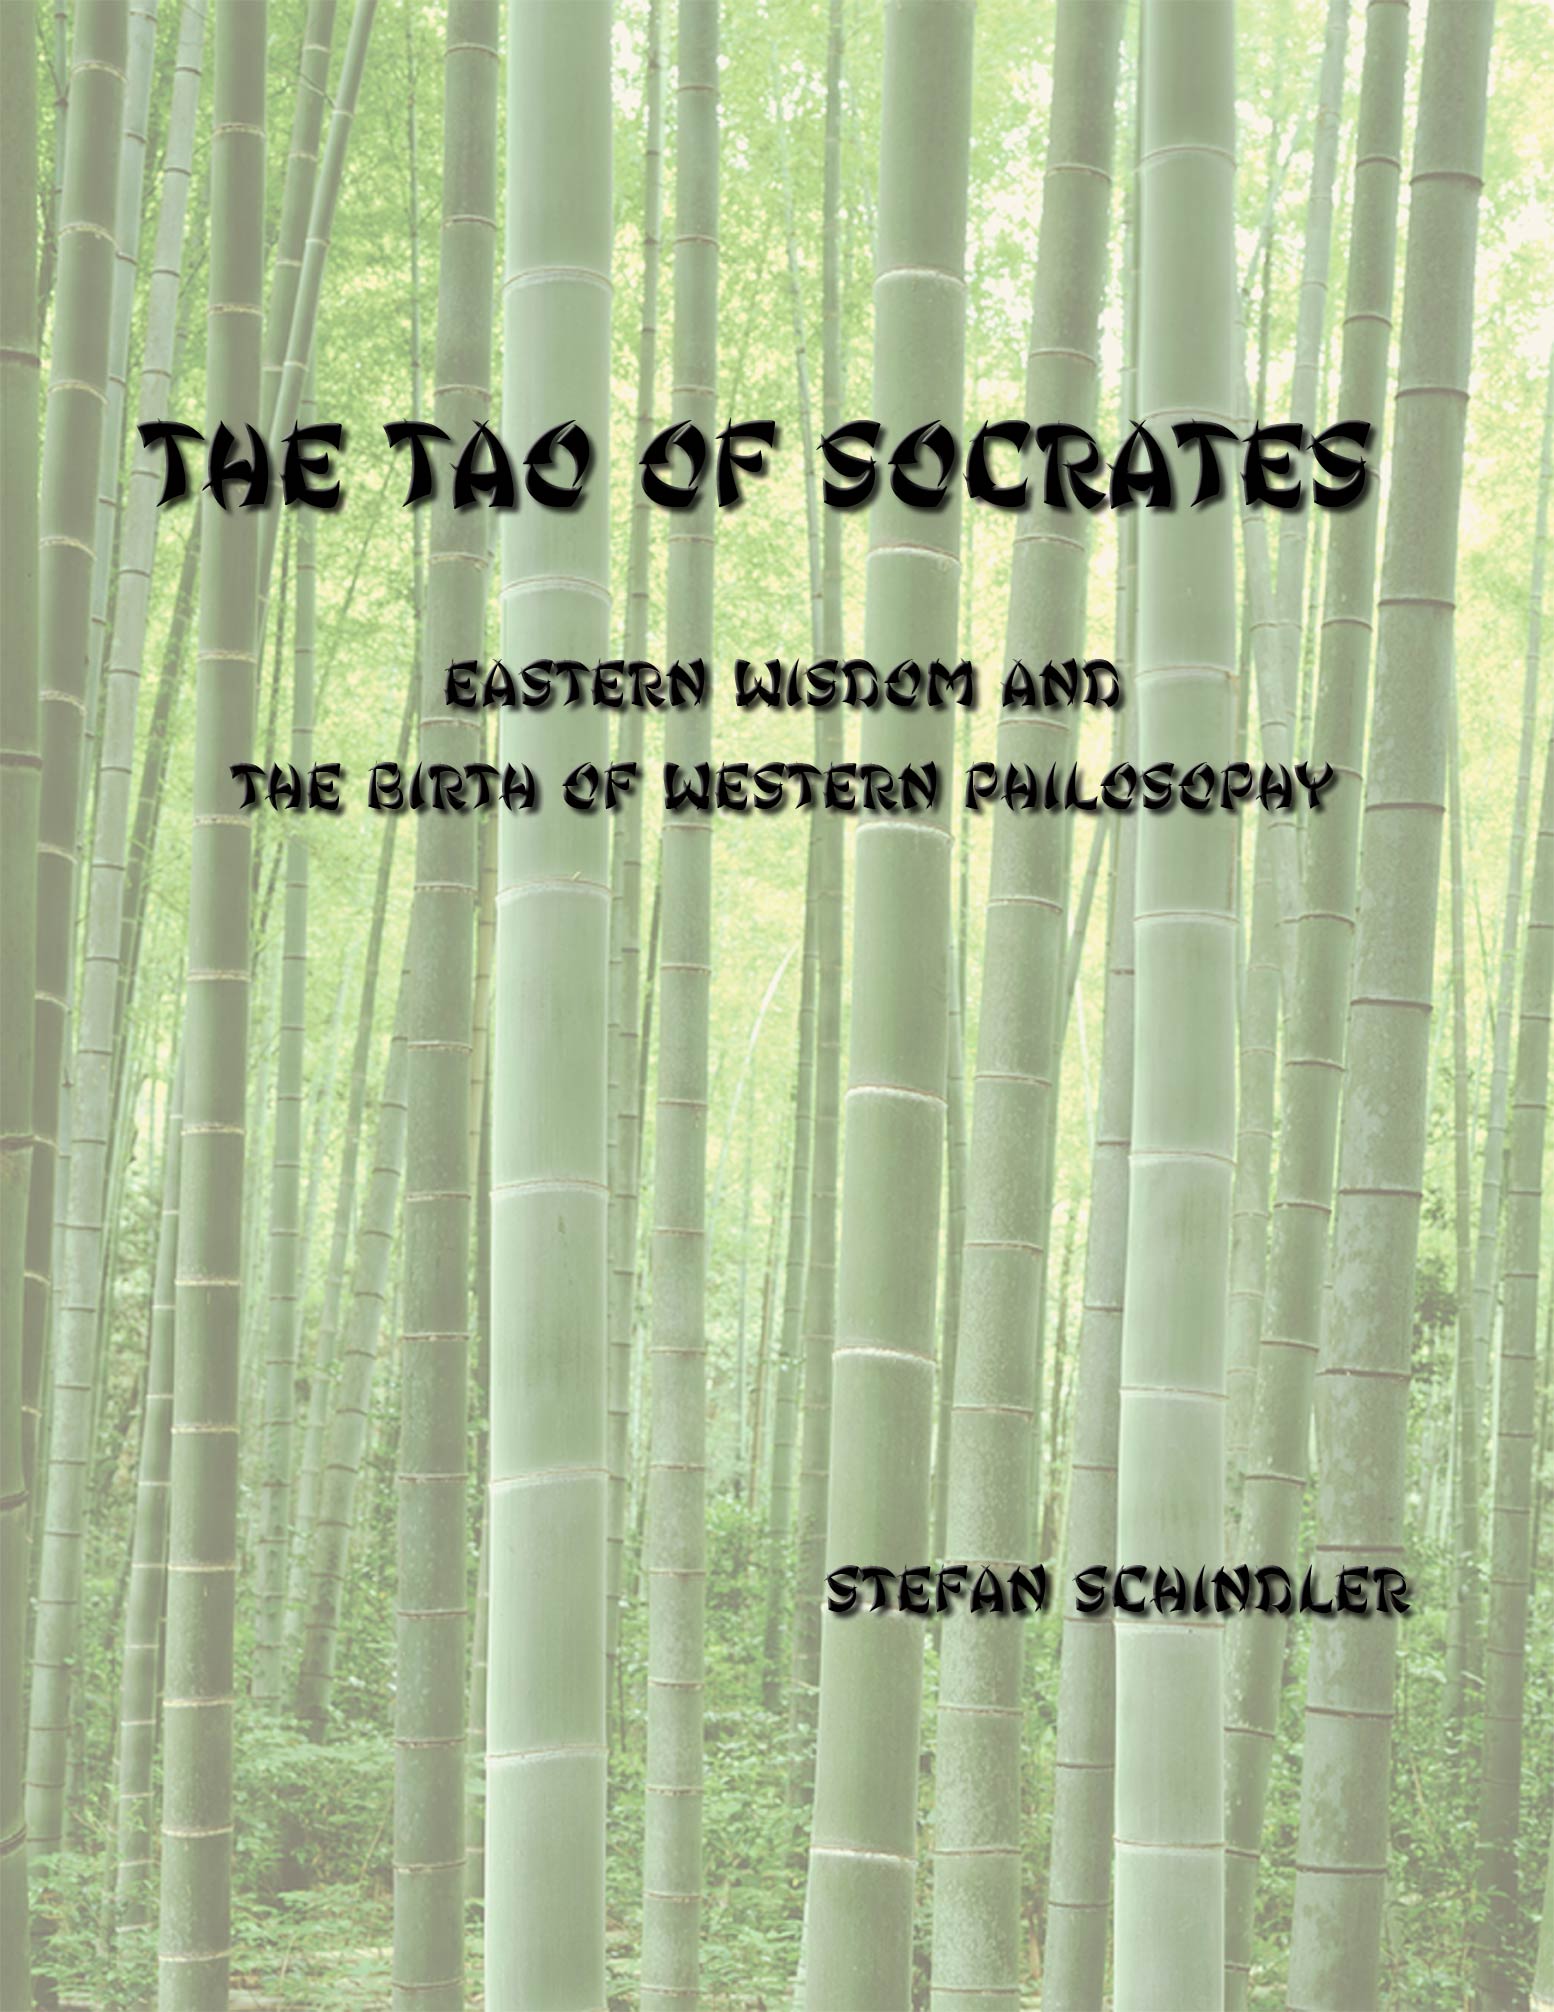 The Tao of Socrates by Stefan Schindler